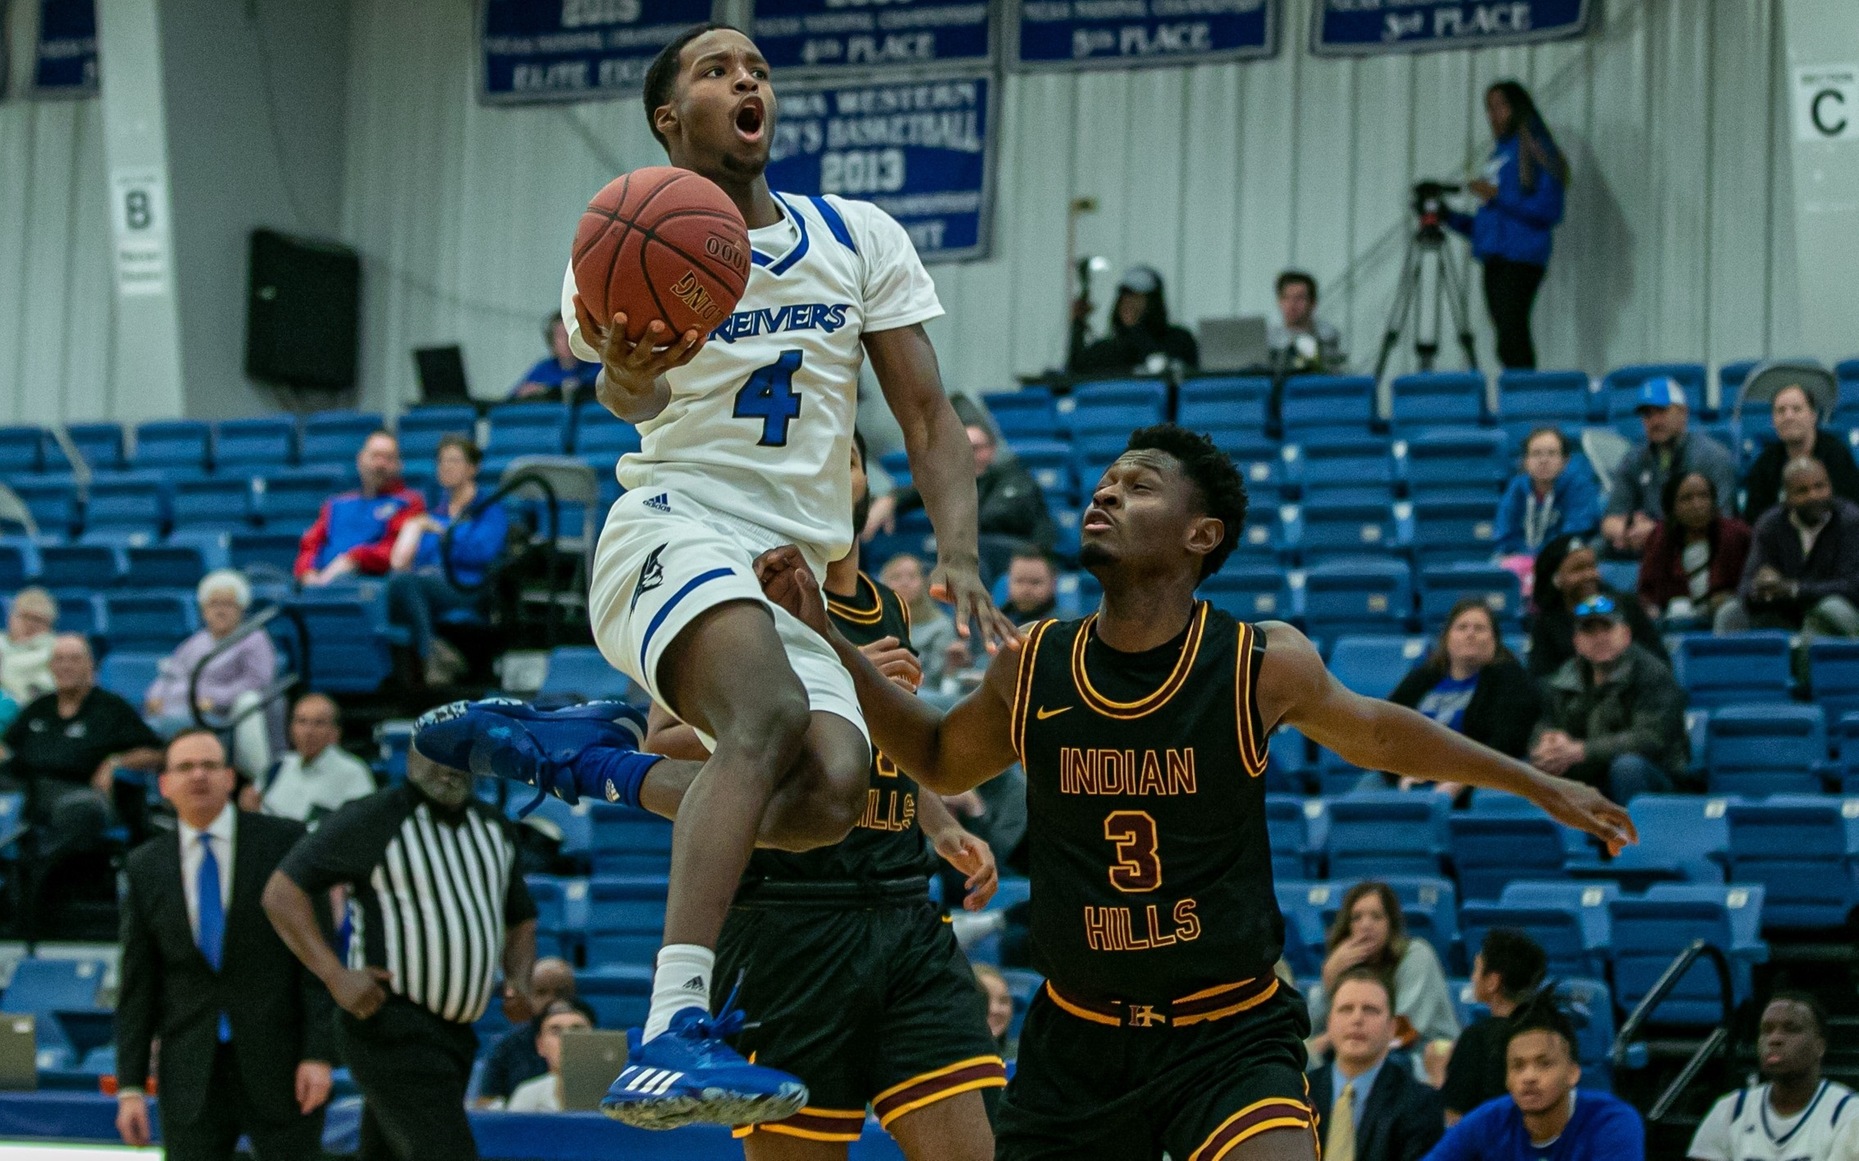 Caleb Huffman's 18 points led the Reivers, who came up short against NJCAA #5 Indian Hills in a contest for the ICCAC Conference lead Saturday (2/8) evening.